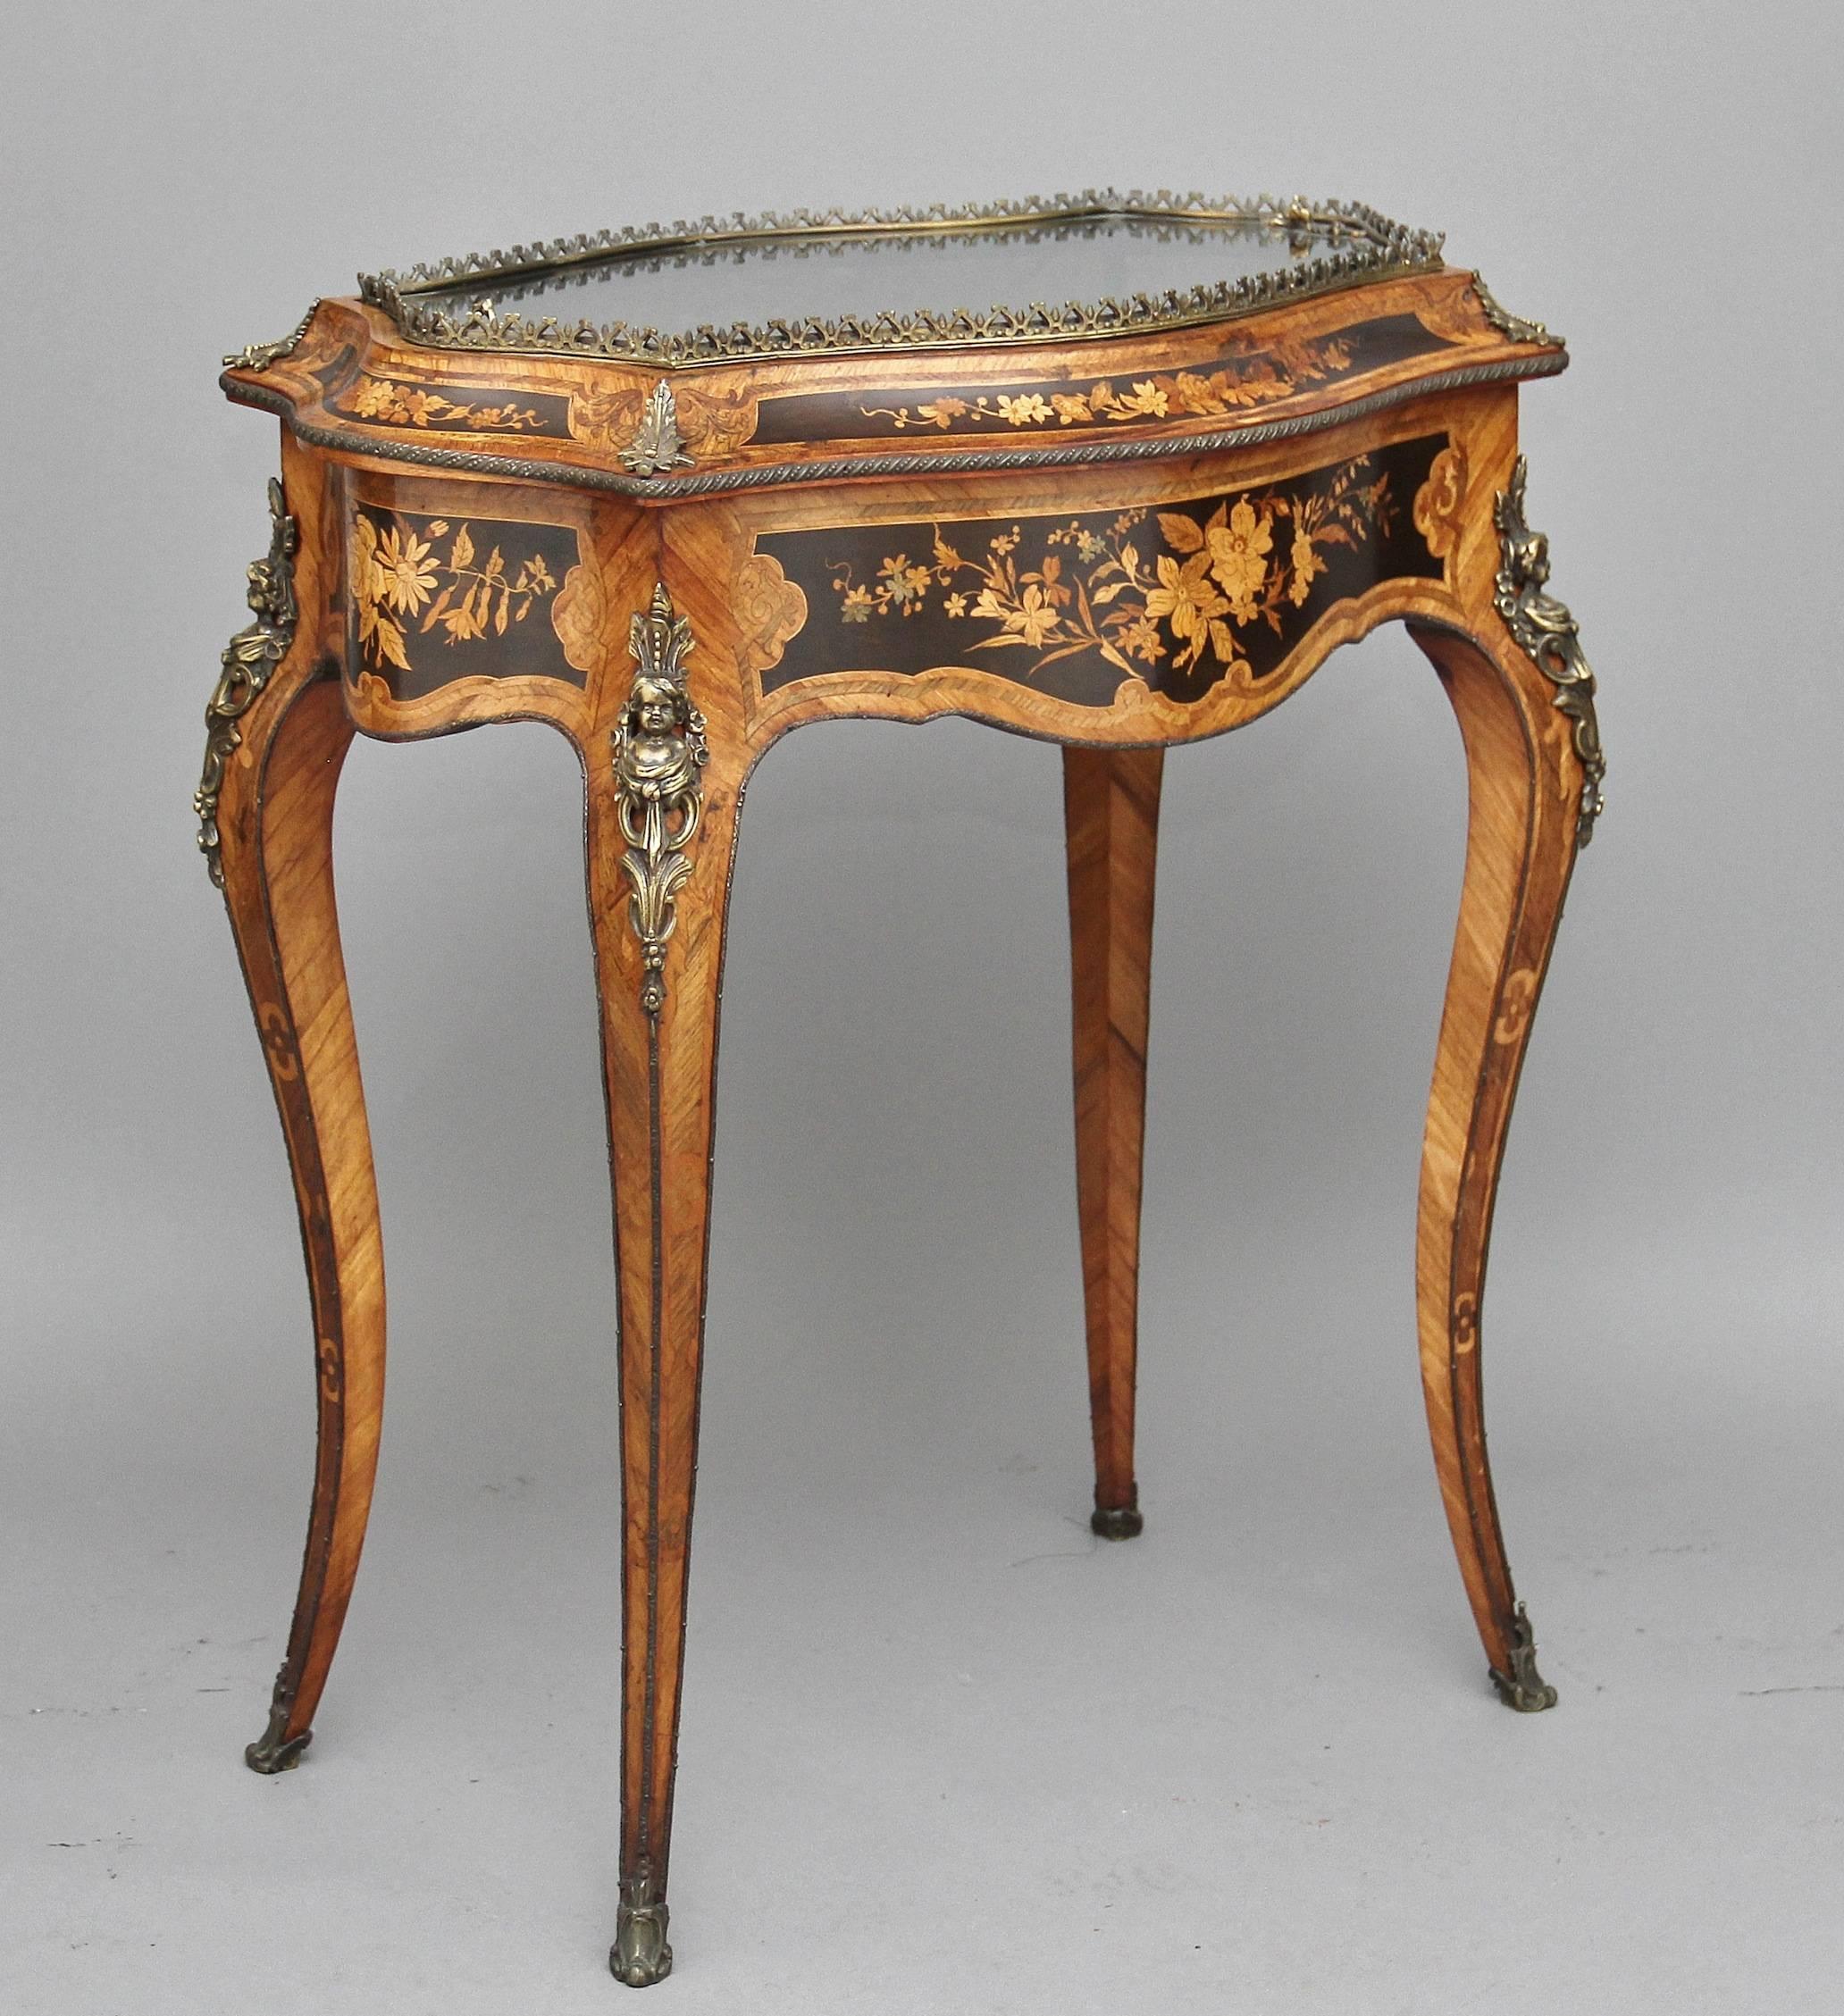 19th century French kingwood and inlaid bijouterie table with lovely quality gilt mounts, with a brass gallery mount surrounding a removable glass panel top enclosing a lined interior, having a shaped apron on all sides decorated with floral